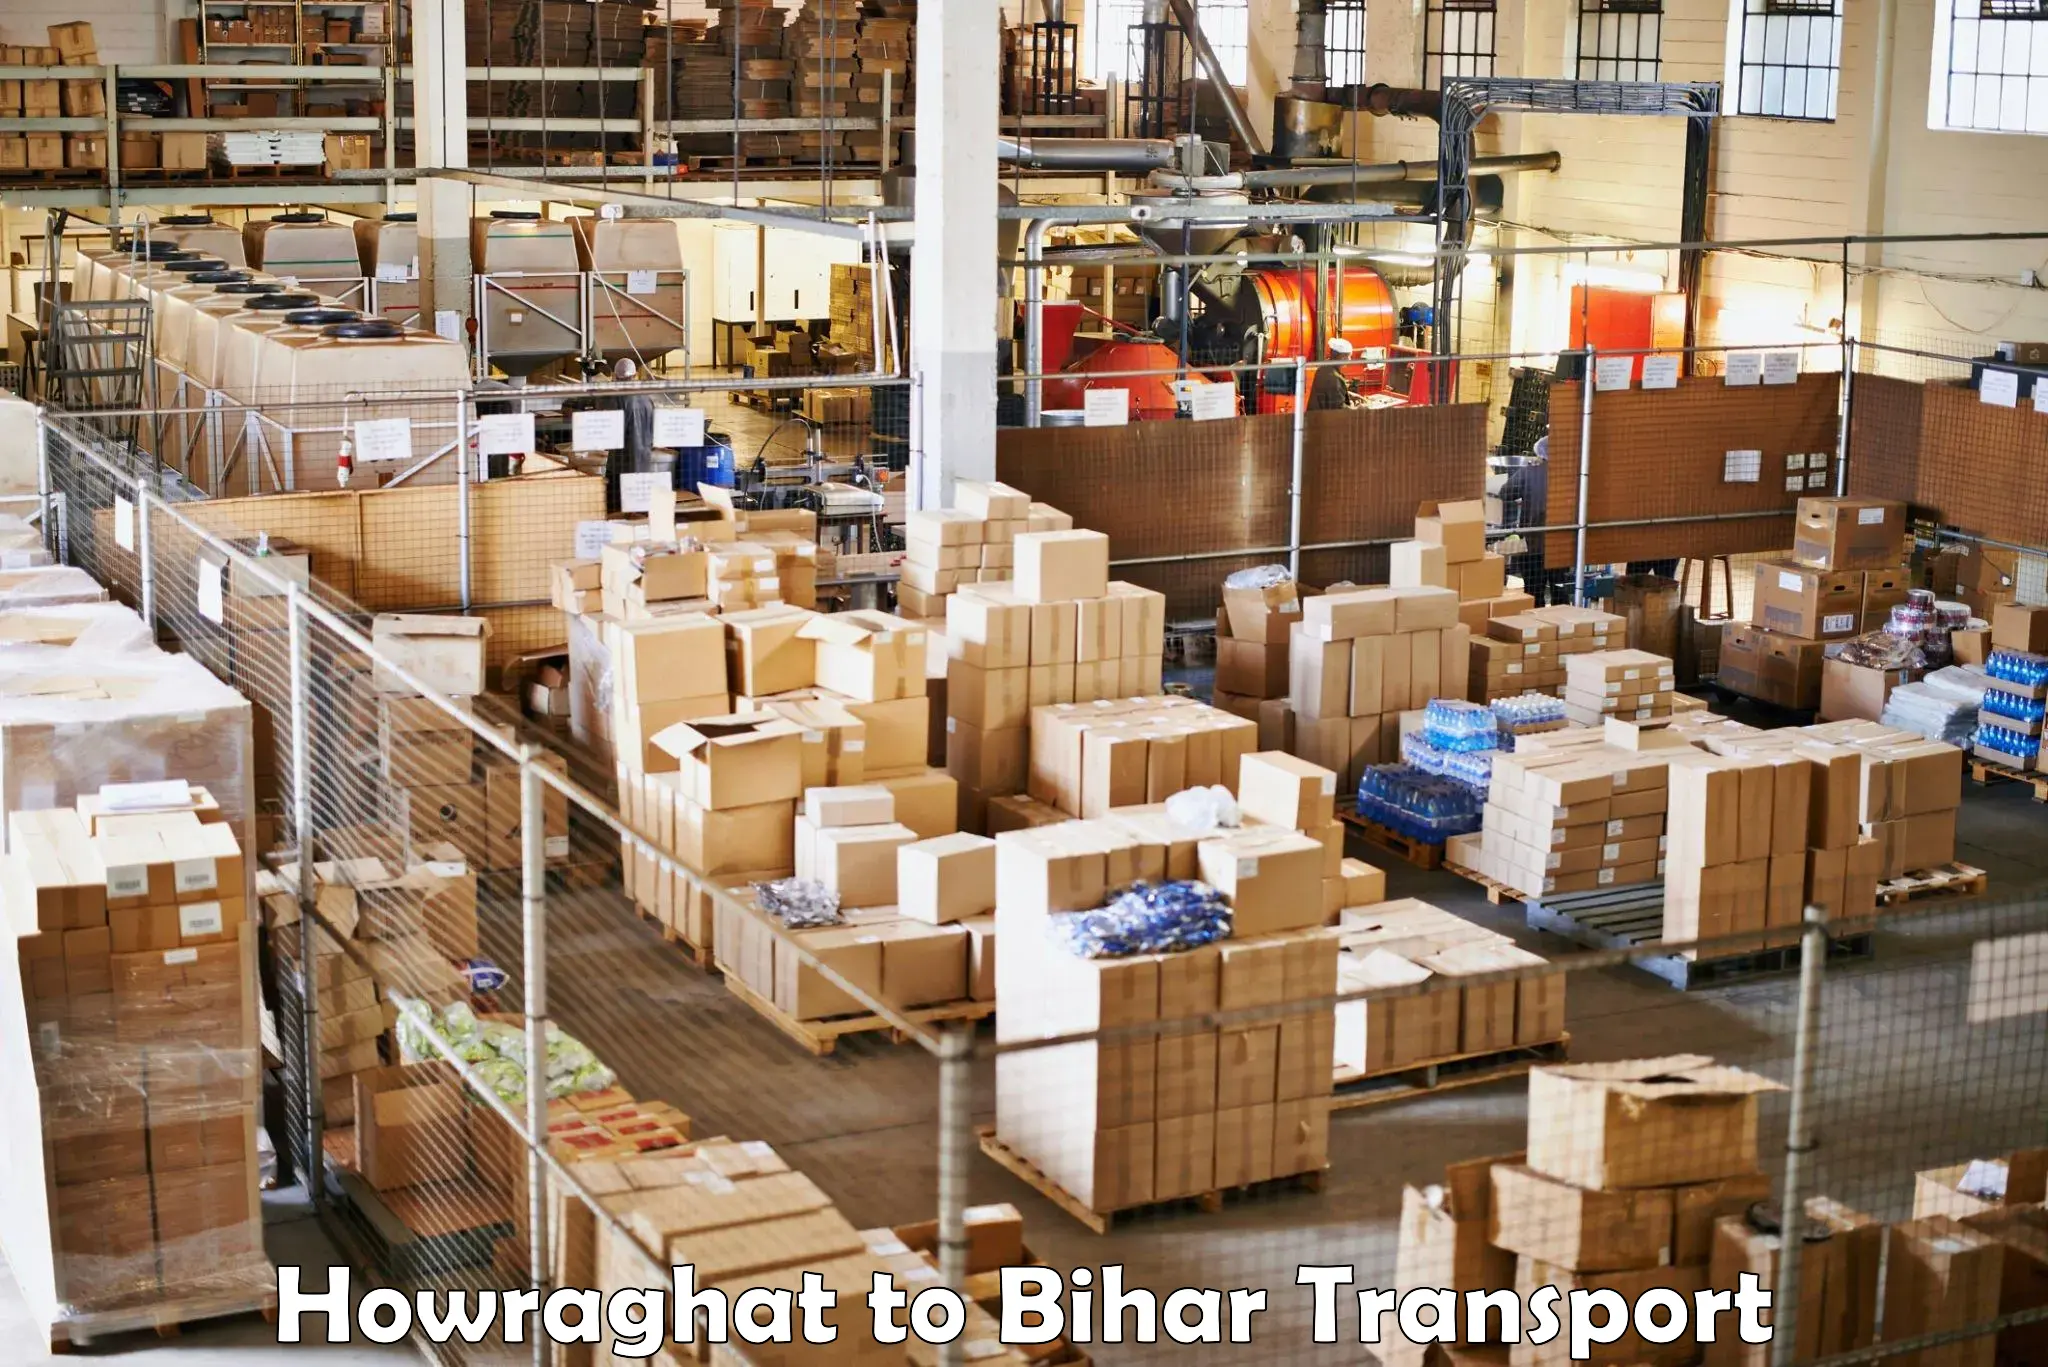 Truck transport companies in India Howraghat to Barbigha